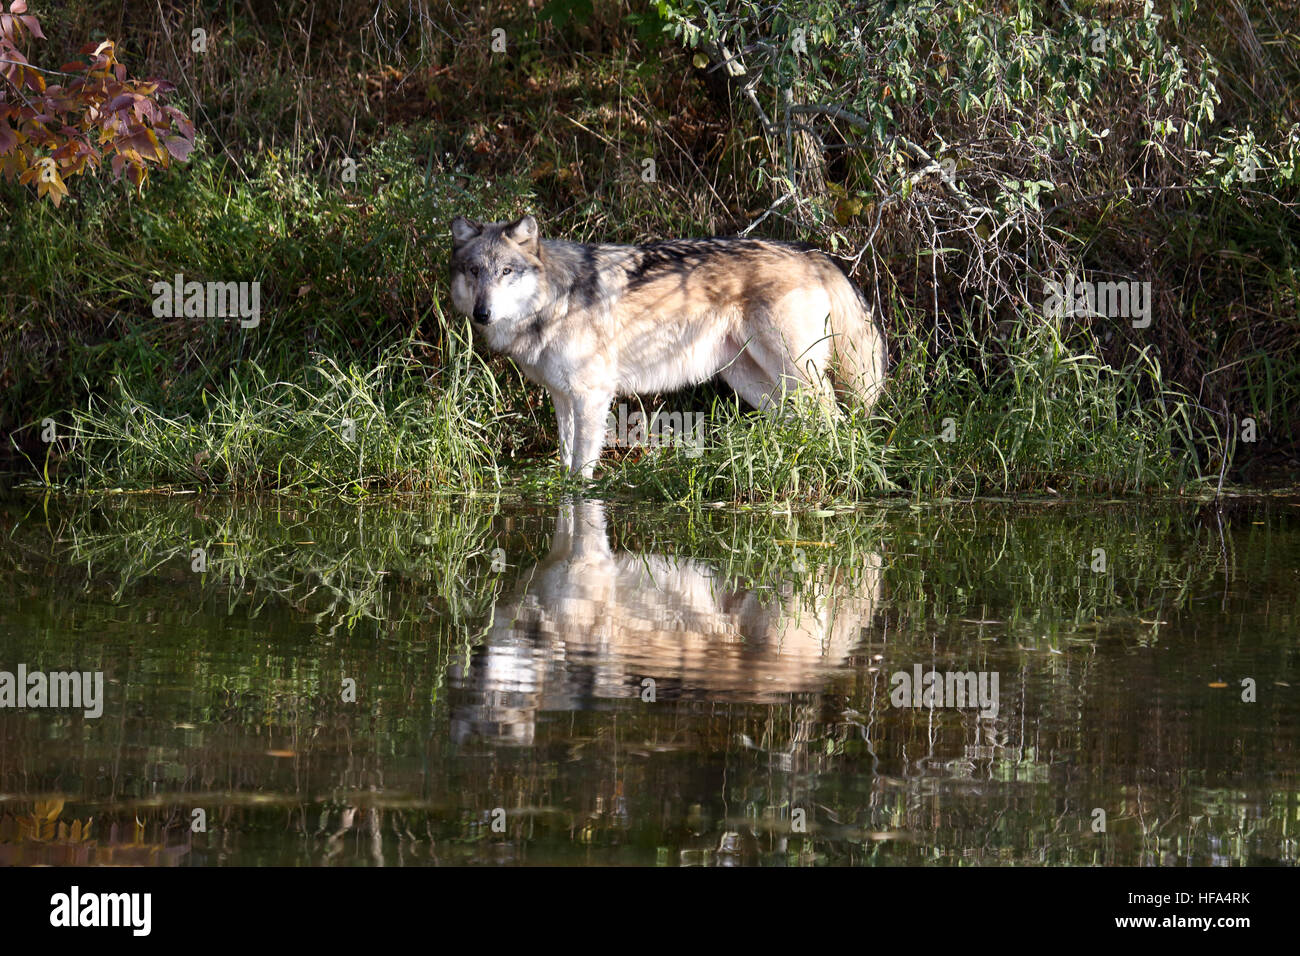 One wolf posing at waters edge with reflection Stock Photo